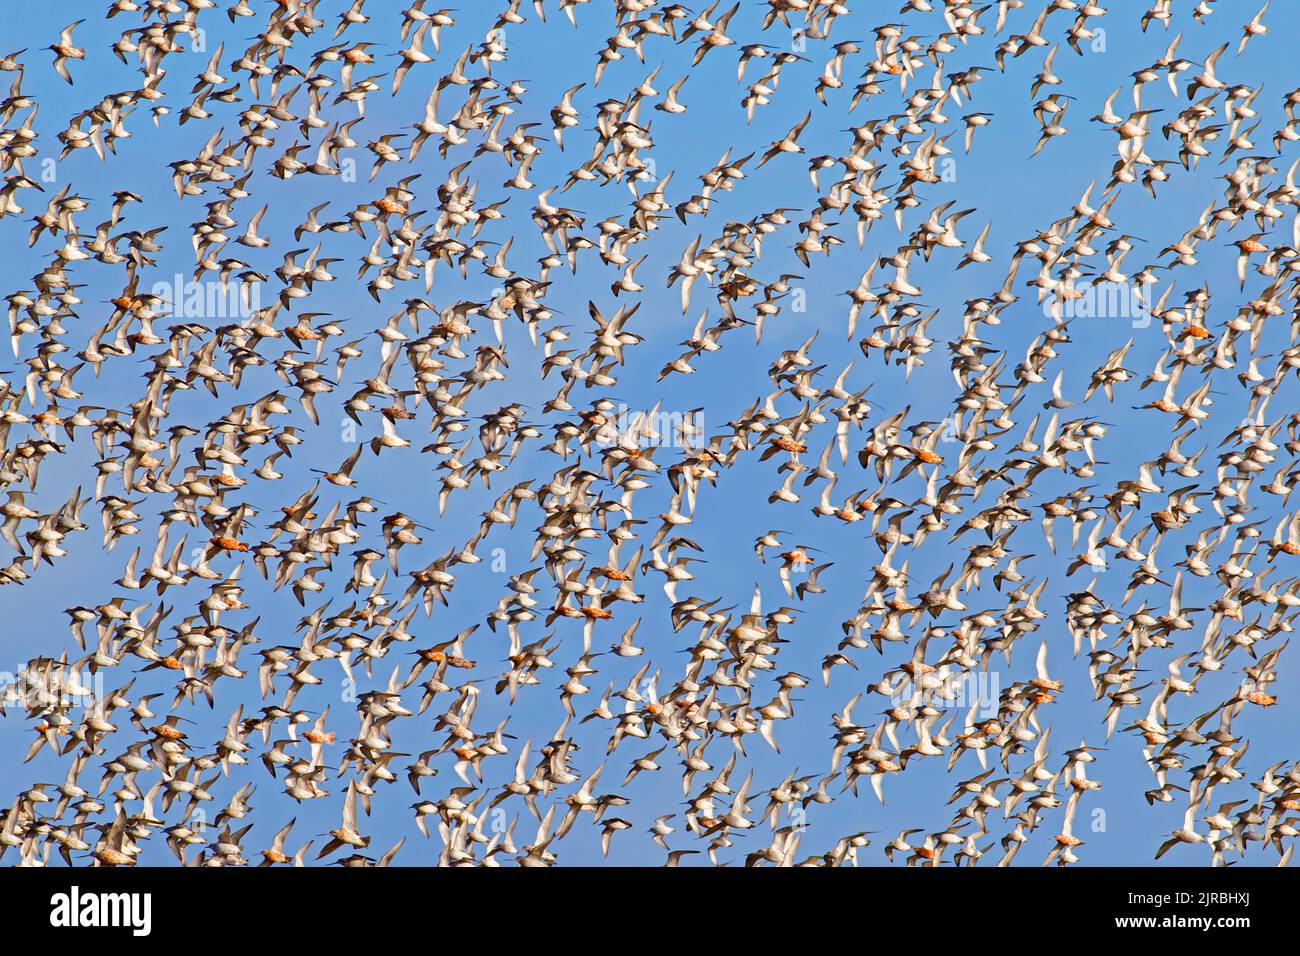 Huge flock of bar-tailed godwits (Limosa lapponica) and red knots (Calidris canutus) flying against blue sky along the North Sea coast in spring Stock Photo